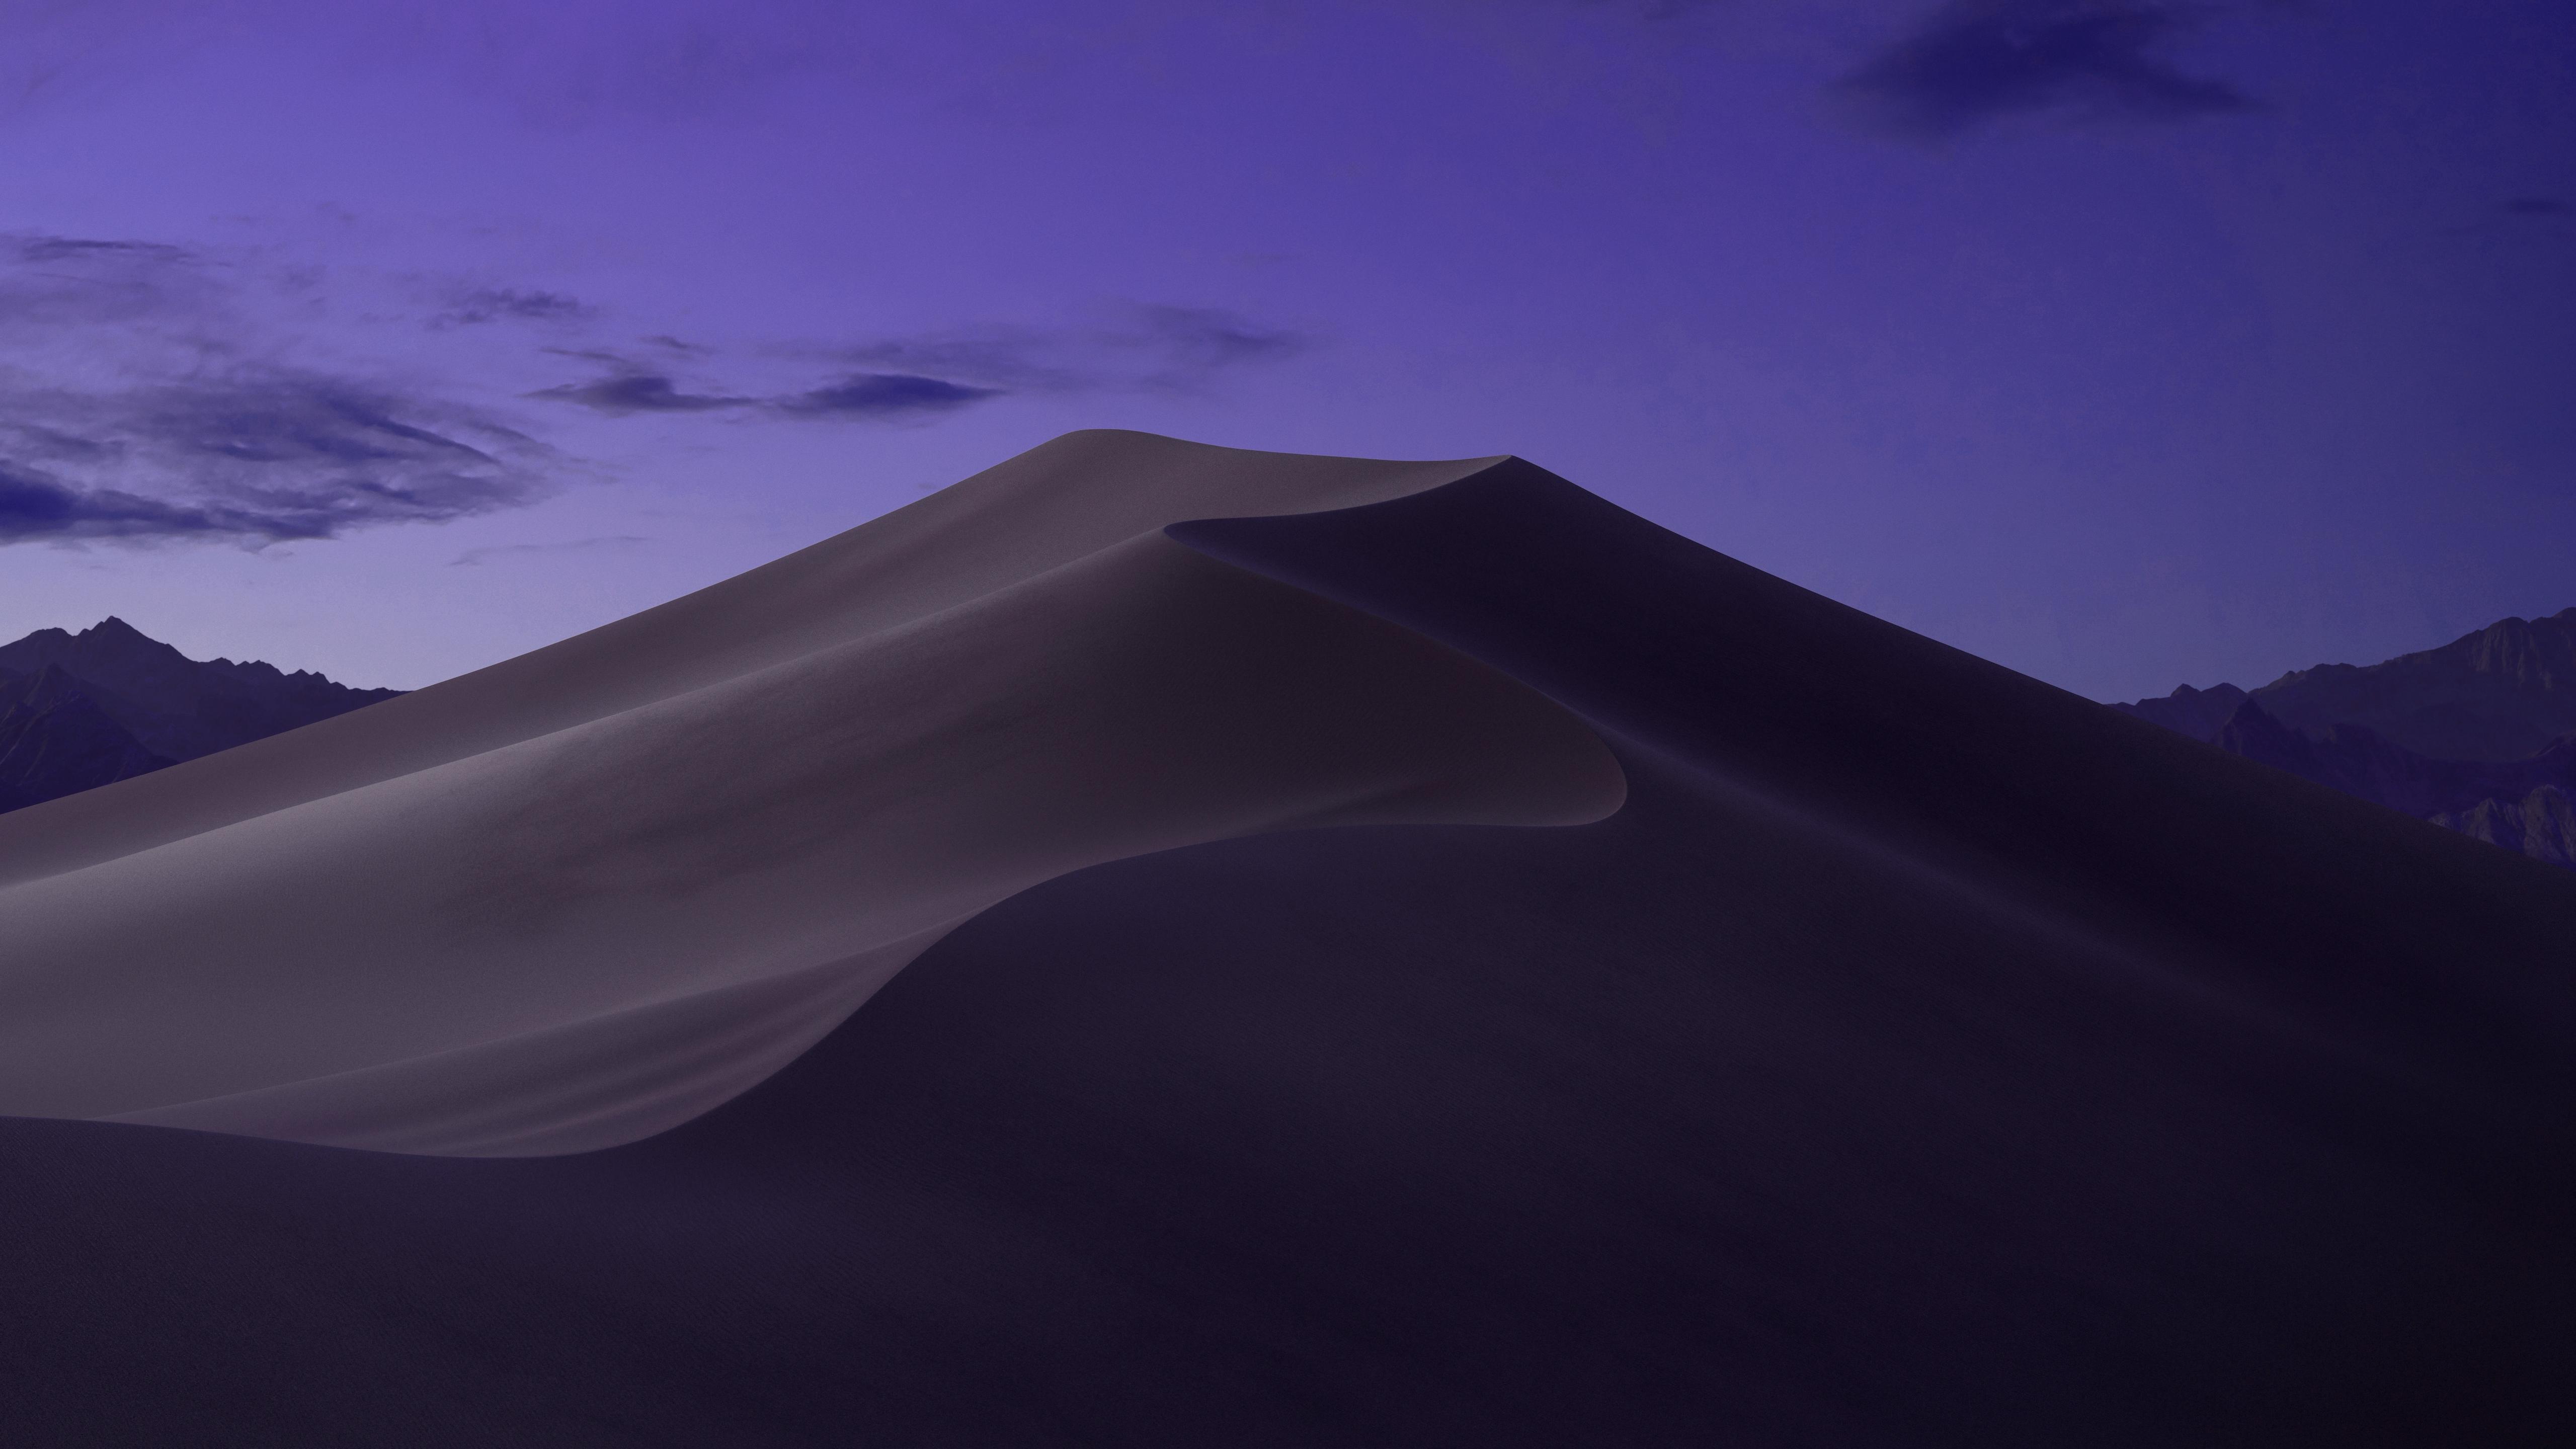 download macos mojave from catalina